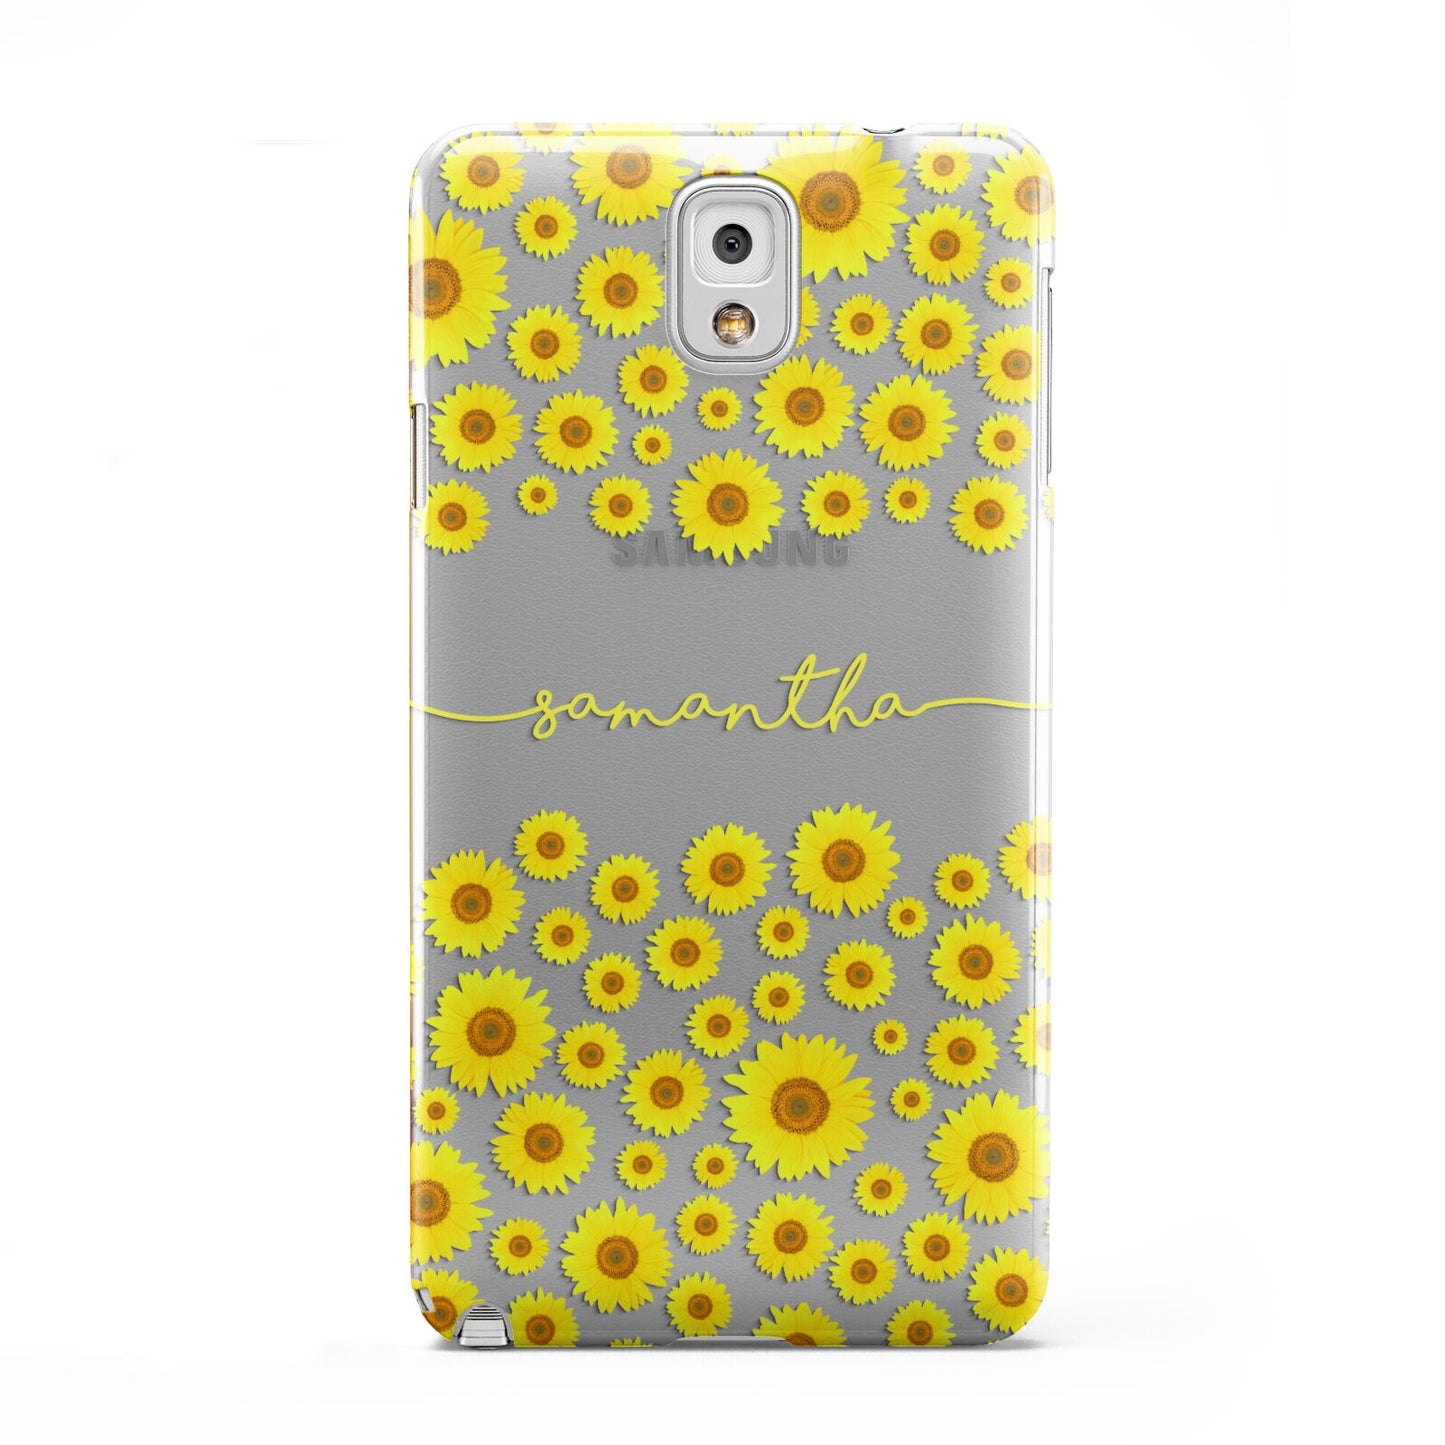 Personalised Sunflower Samsung Galaxy Note 3 Case